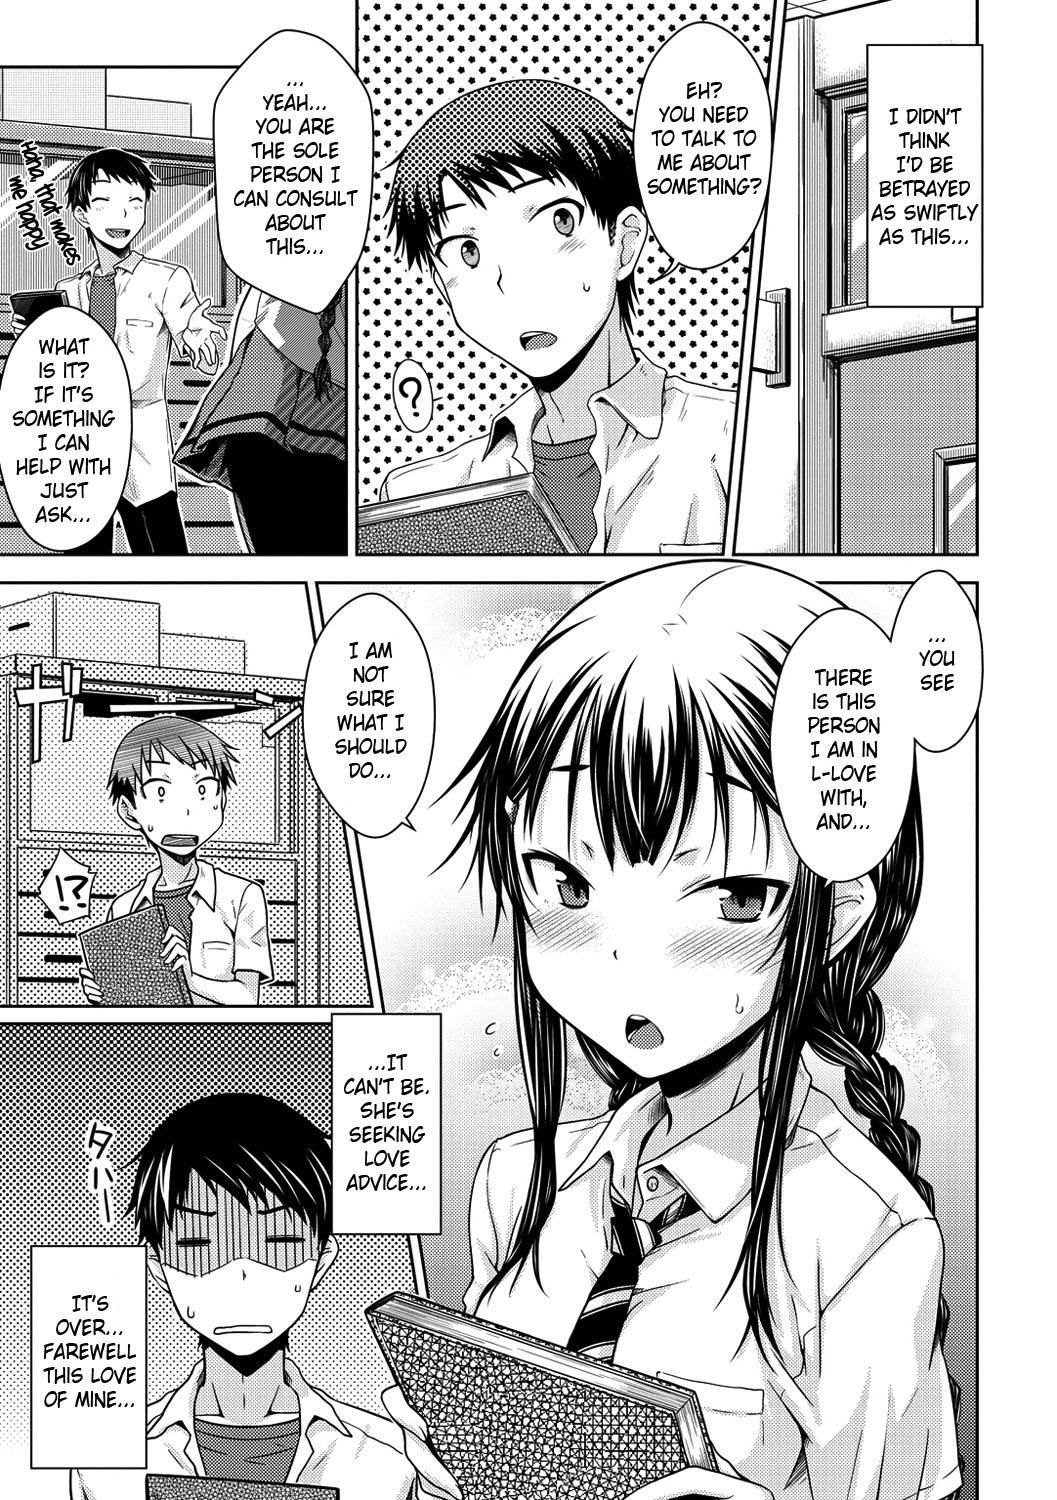 Hetero Gentei Kanojo - A Limited Sweetheart Ch. 1 Small Boobs - Page 7